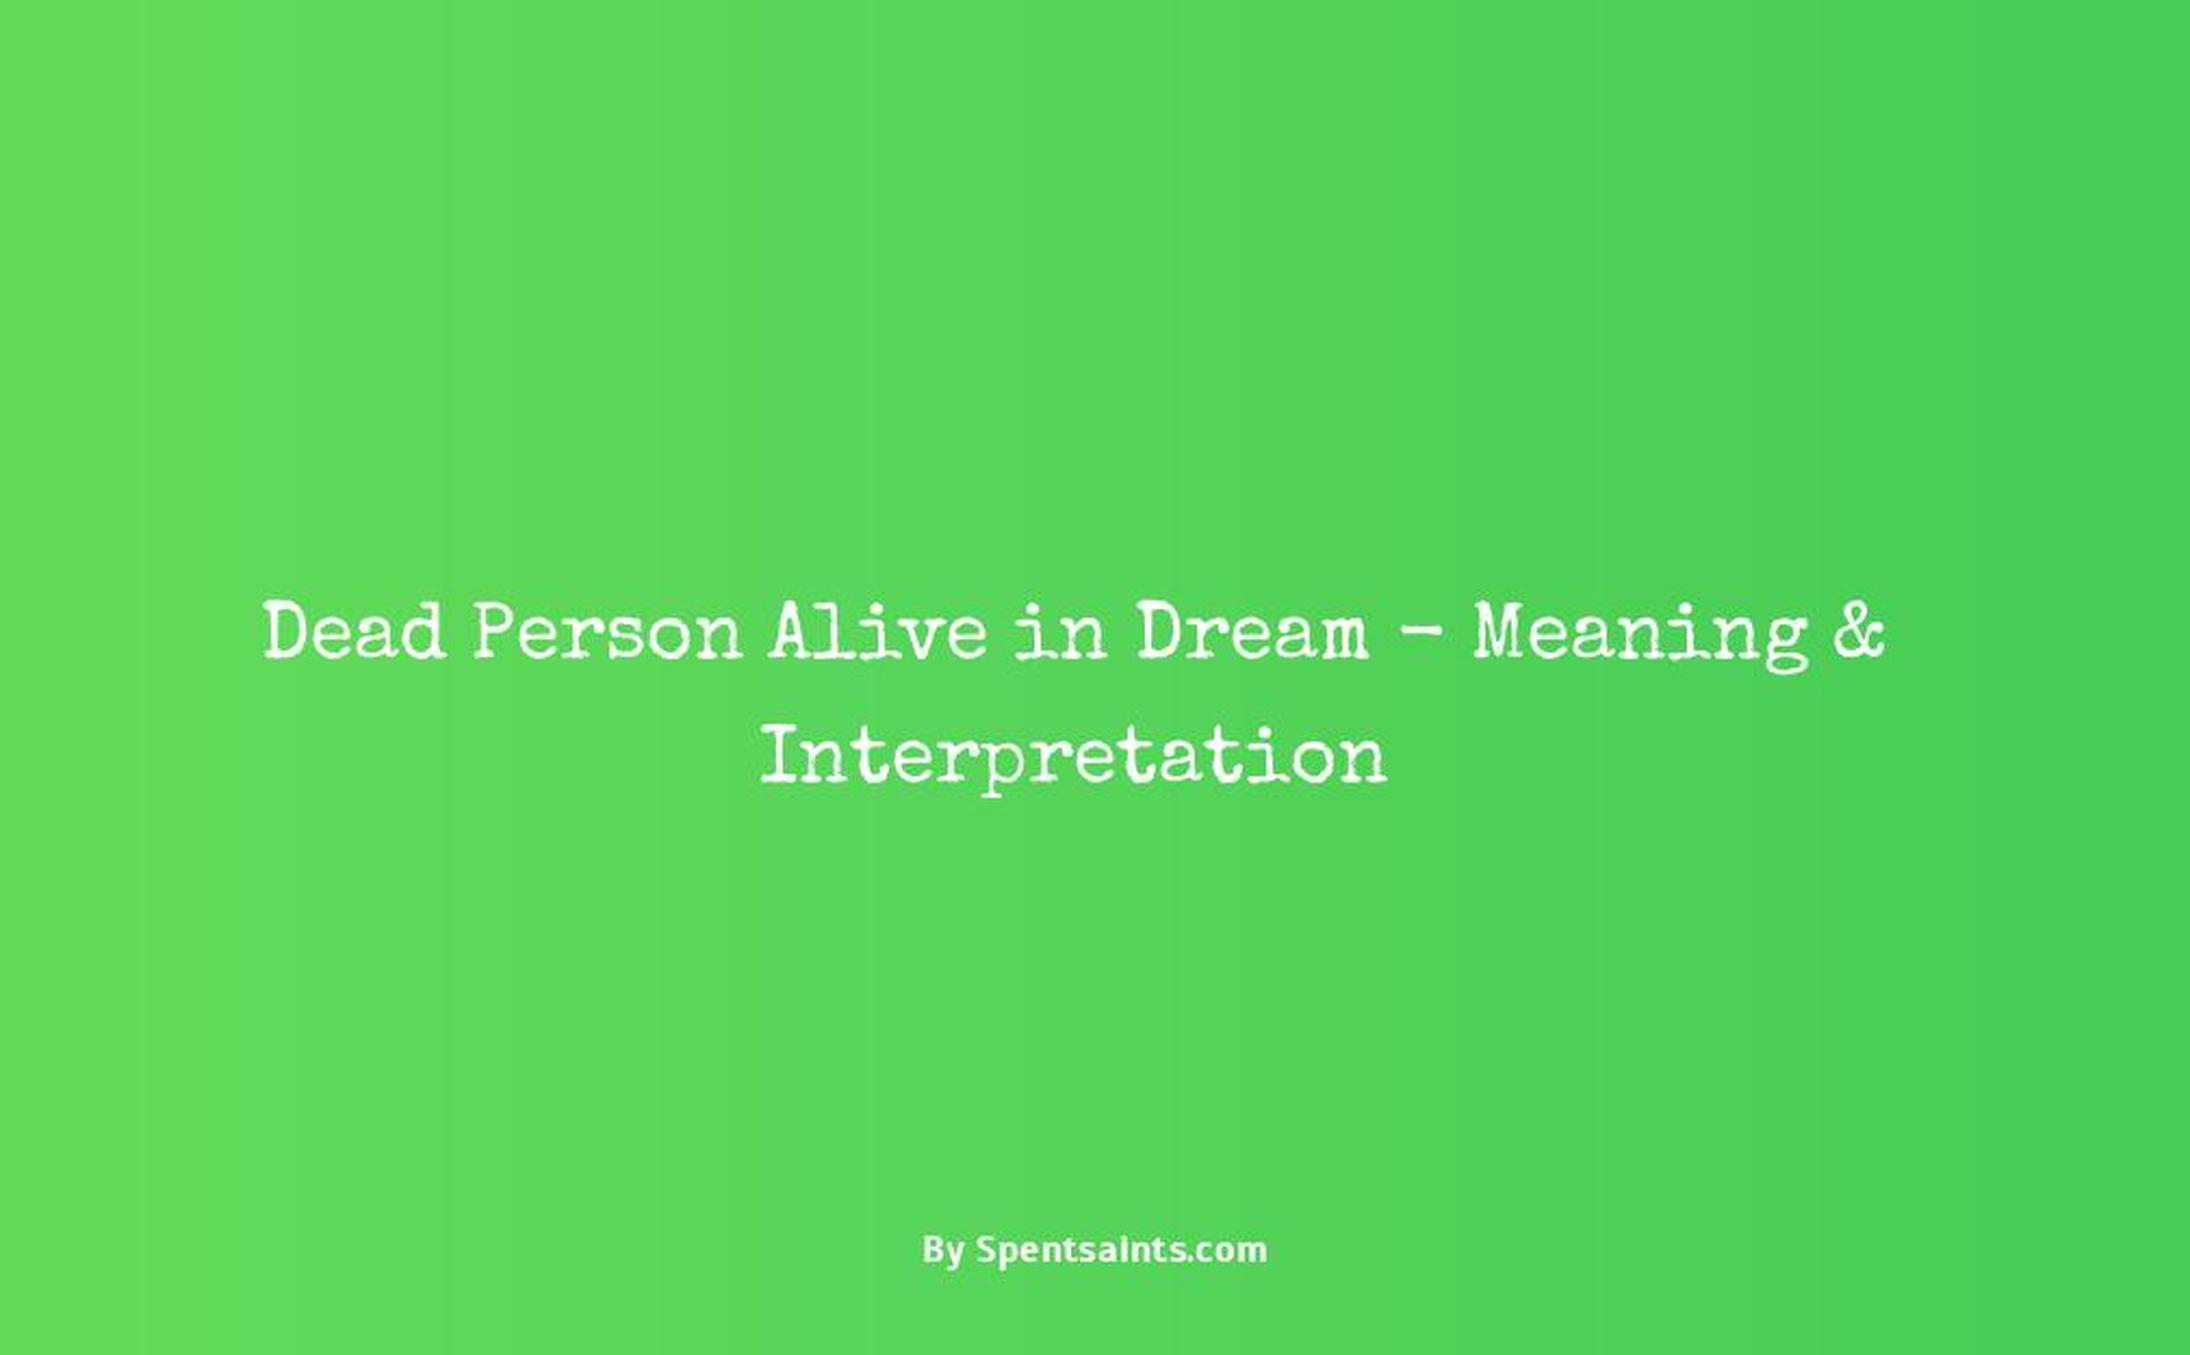 what is the meaning of dead person alive in dream